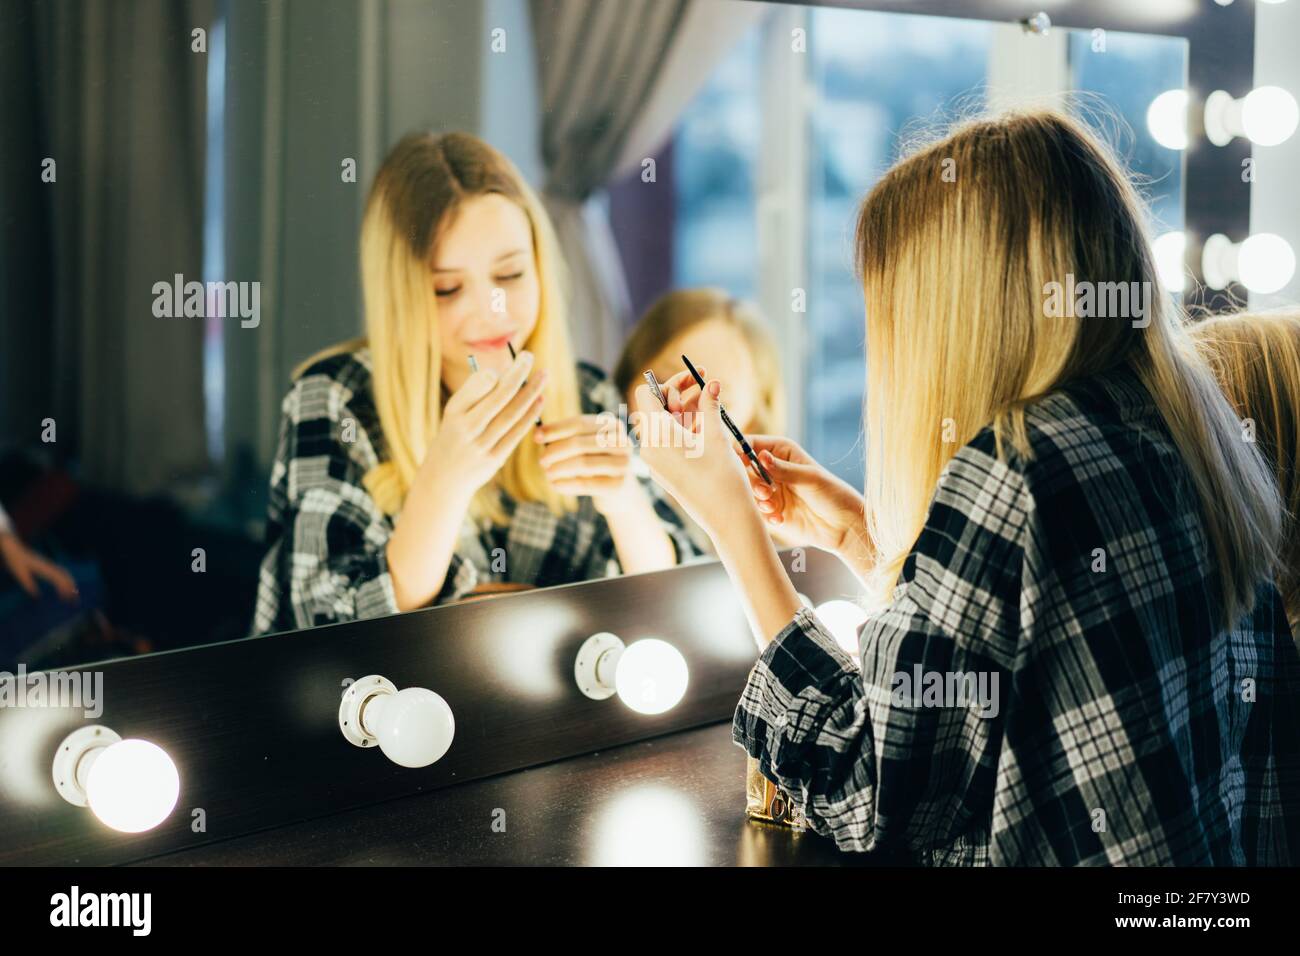 Teen in the dressing room in front of the mirror makes a make-up. Stylish girl in a plaid shirt with cosmetics. Stock Photo